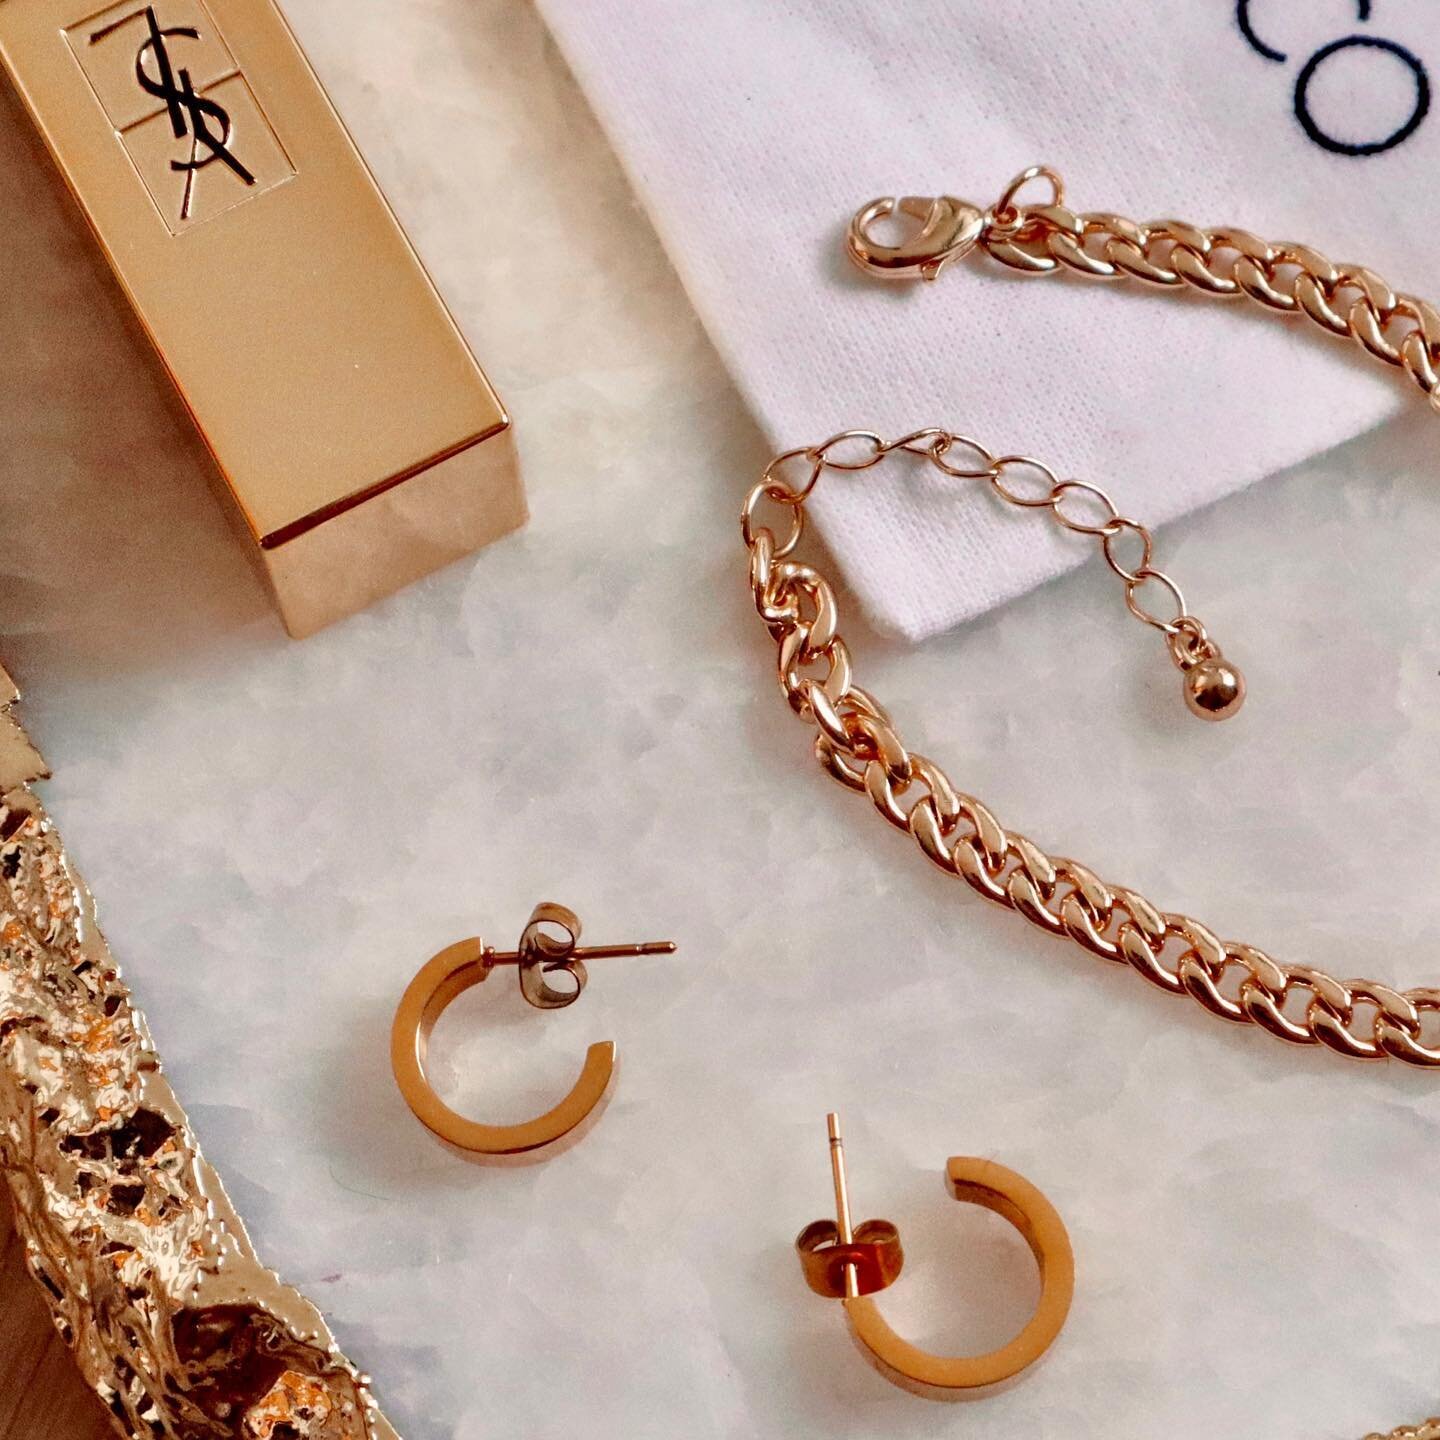 ❌❌❌❌ CLOSED ❌❌❌❌❌

✨GLAM GIVEAWAY ALERT✨

💫The winner can choose any two pieces from the entire @lolalovescocoofficial Jewlrey Collection!!

💫@lolalovescocoofficial is a local Toronto based, family-run business lead by two lovely sisters! They offe